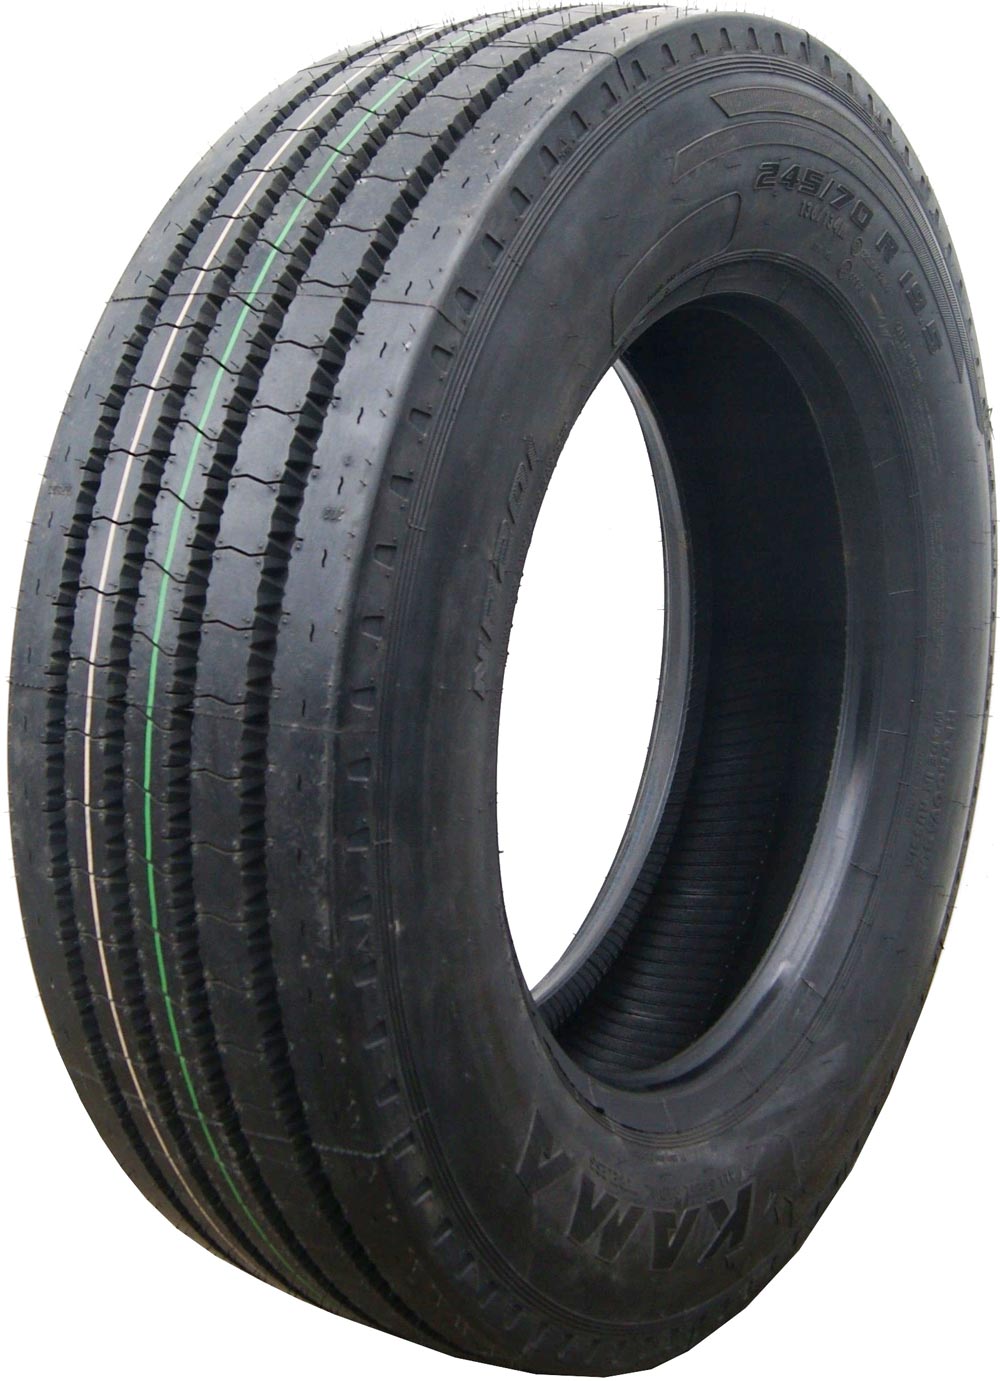 product_type-heavy_tires KAMA NF201 245/70 R19.5 136M